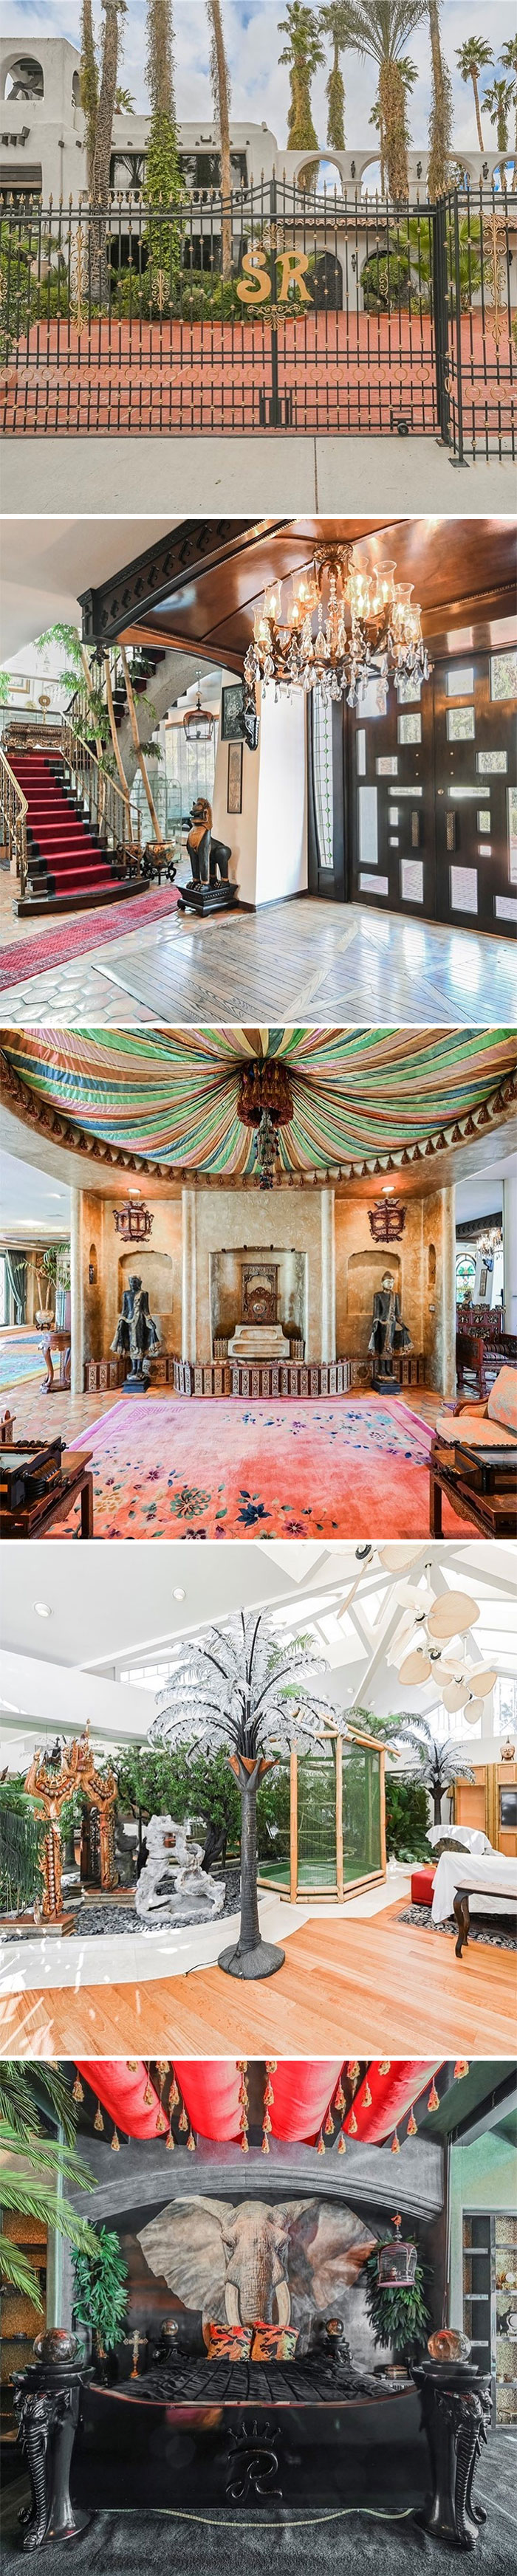 I Am Not Going To Tell You All Who Owned “Jungle Palace” But It Was A Famous Person As Part Of A Famous Duo In Las Vegas. $3,000,000